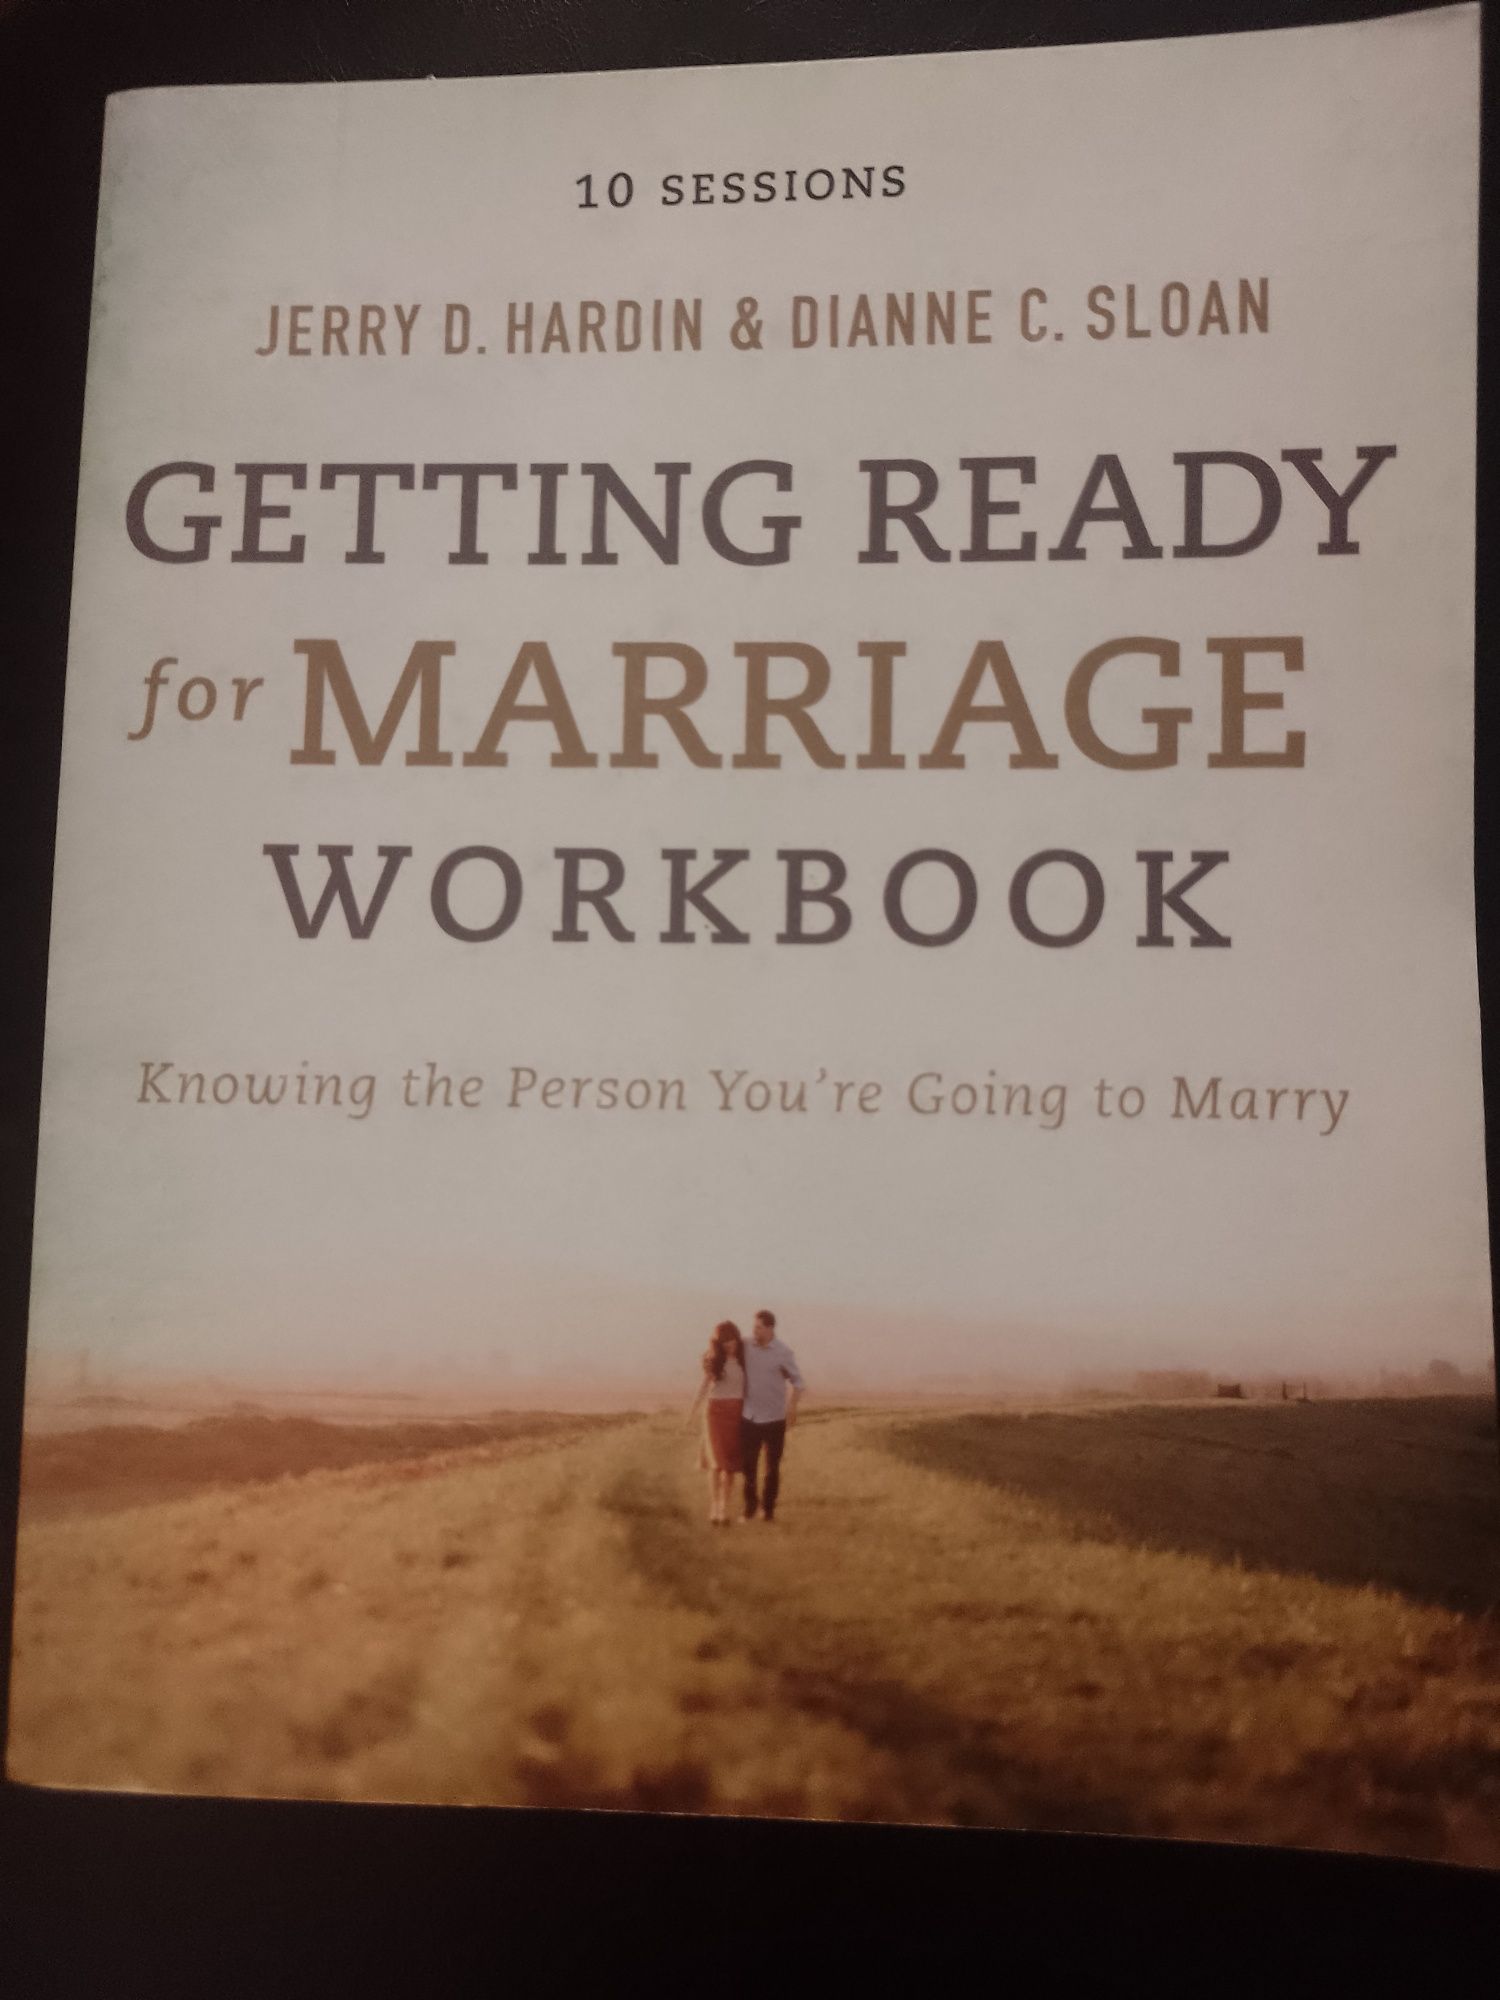 Getting ready for marriege. Workbook